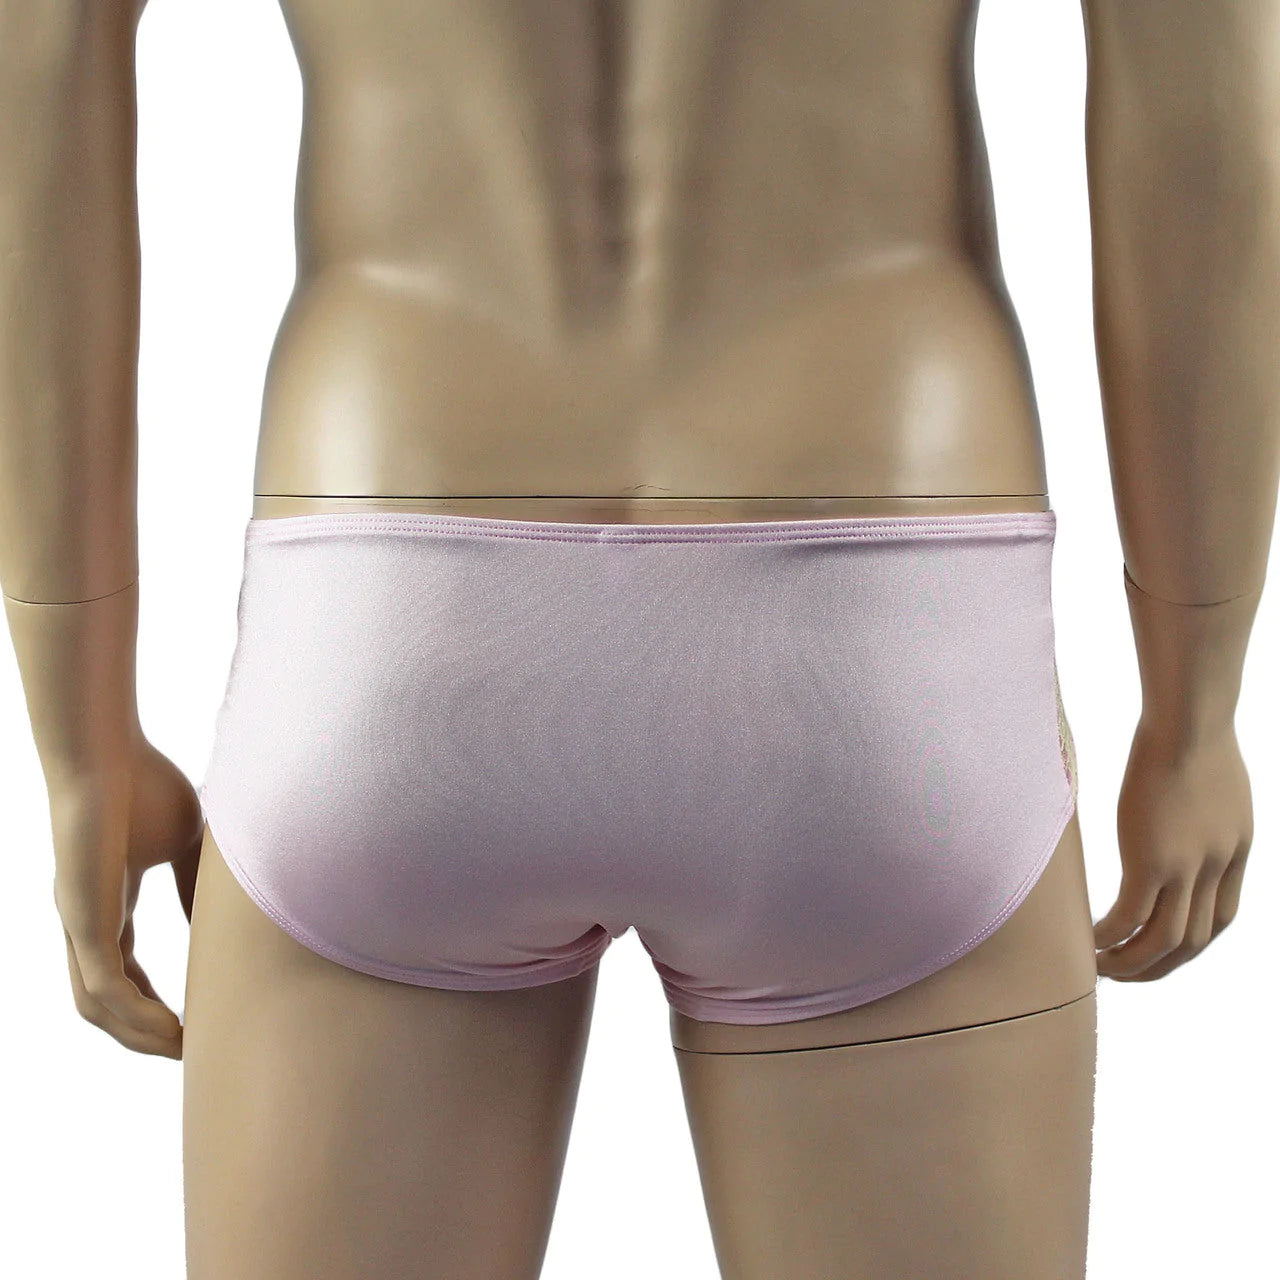 SALE - Mens Luxury Stretch Boxer Brief with Beautiful Lace Pink